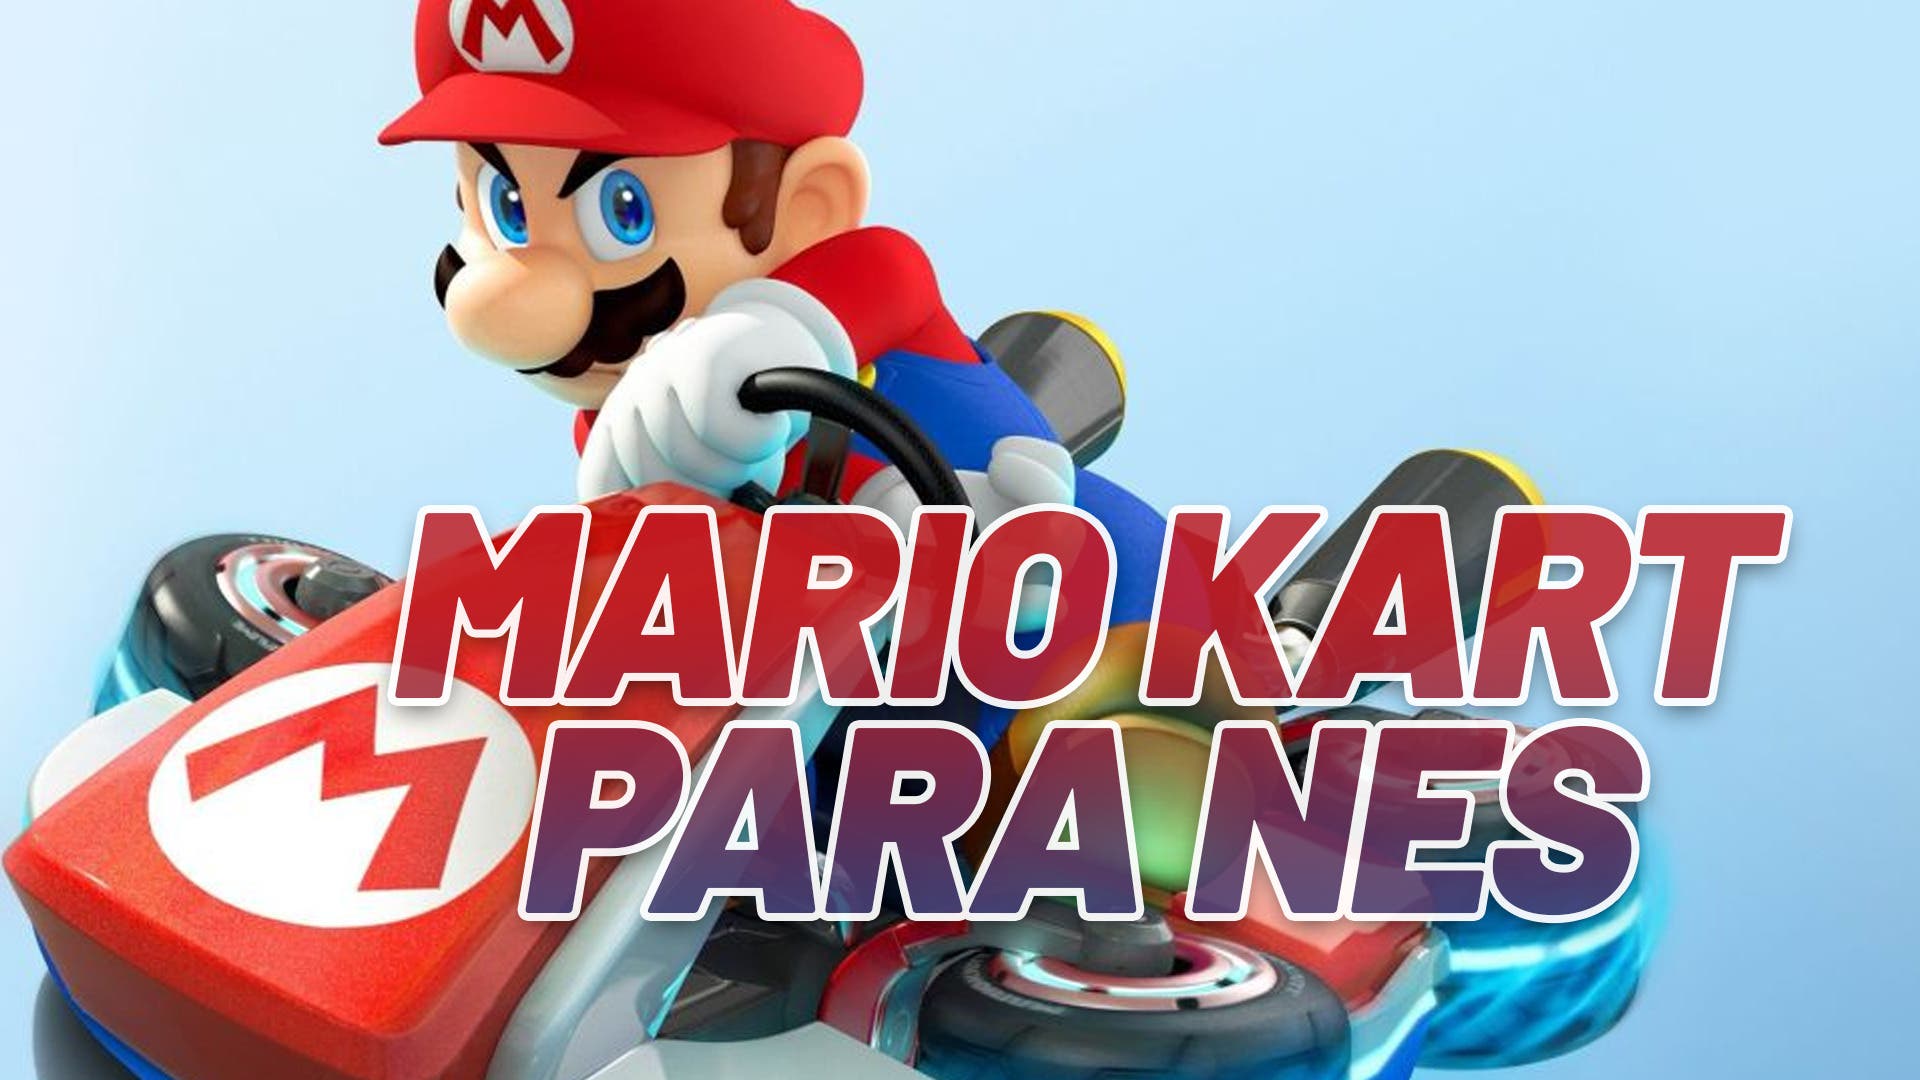 They imagine what a Mario Kart would have been for the NES and the result is impressive